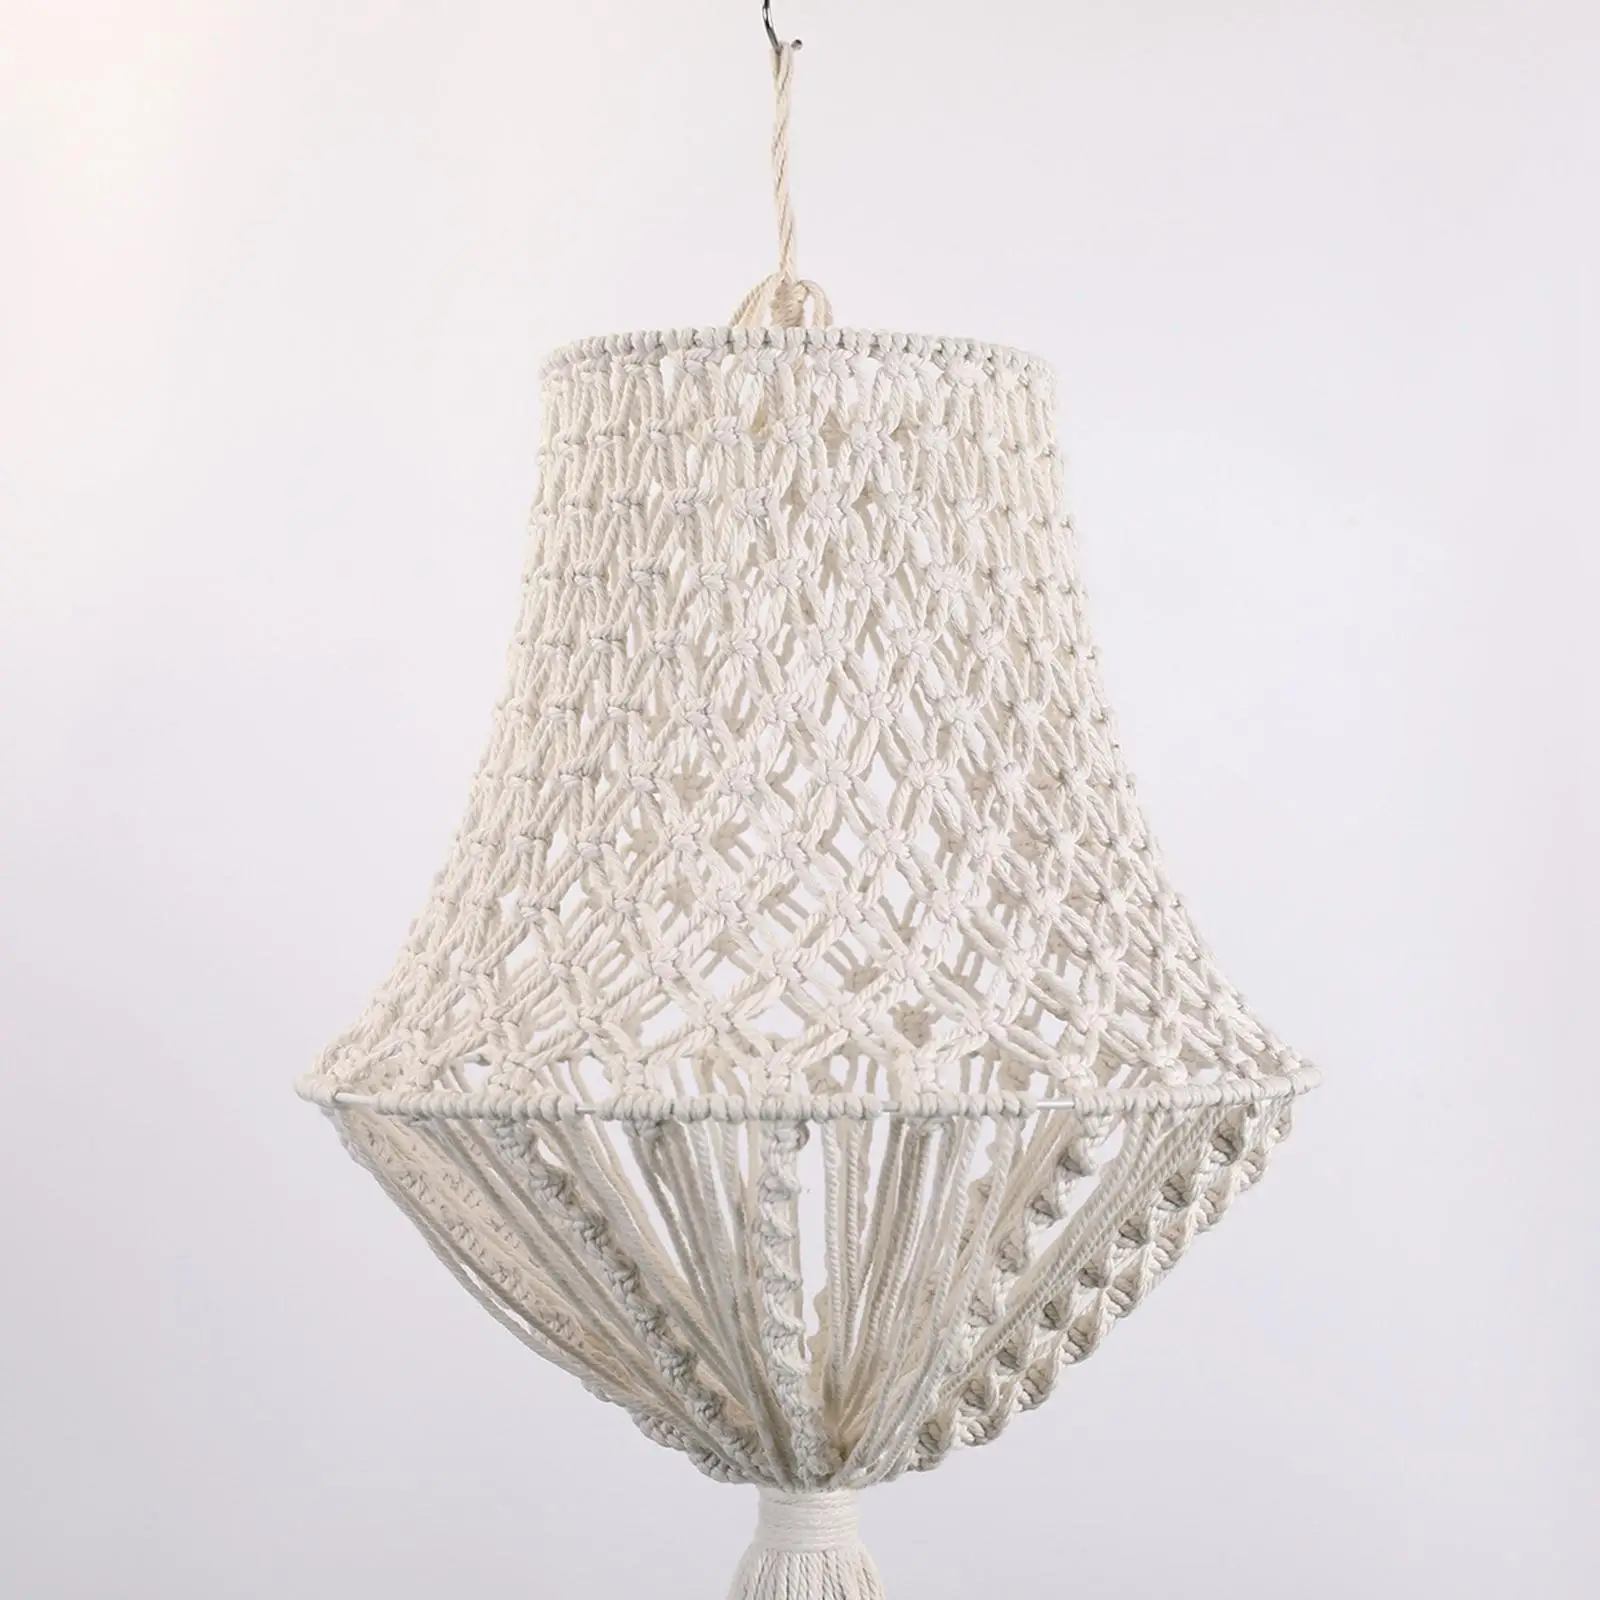 Macrame Lamp Shade Woven Light Shade Fitting Hanging Pendant Light Cover Chandelier Lampshade for Living Room Home Decorative